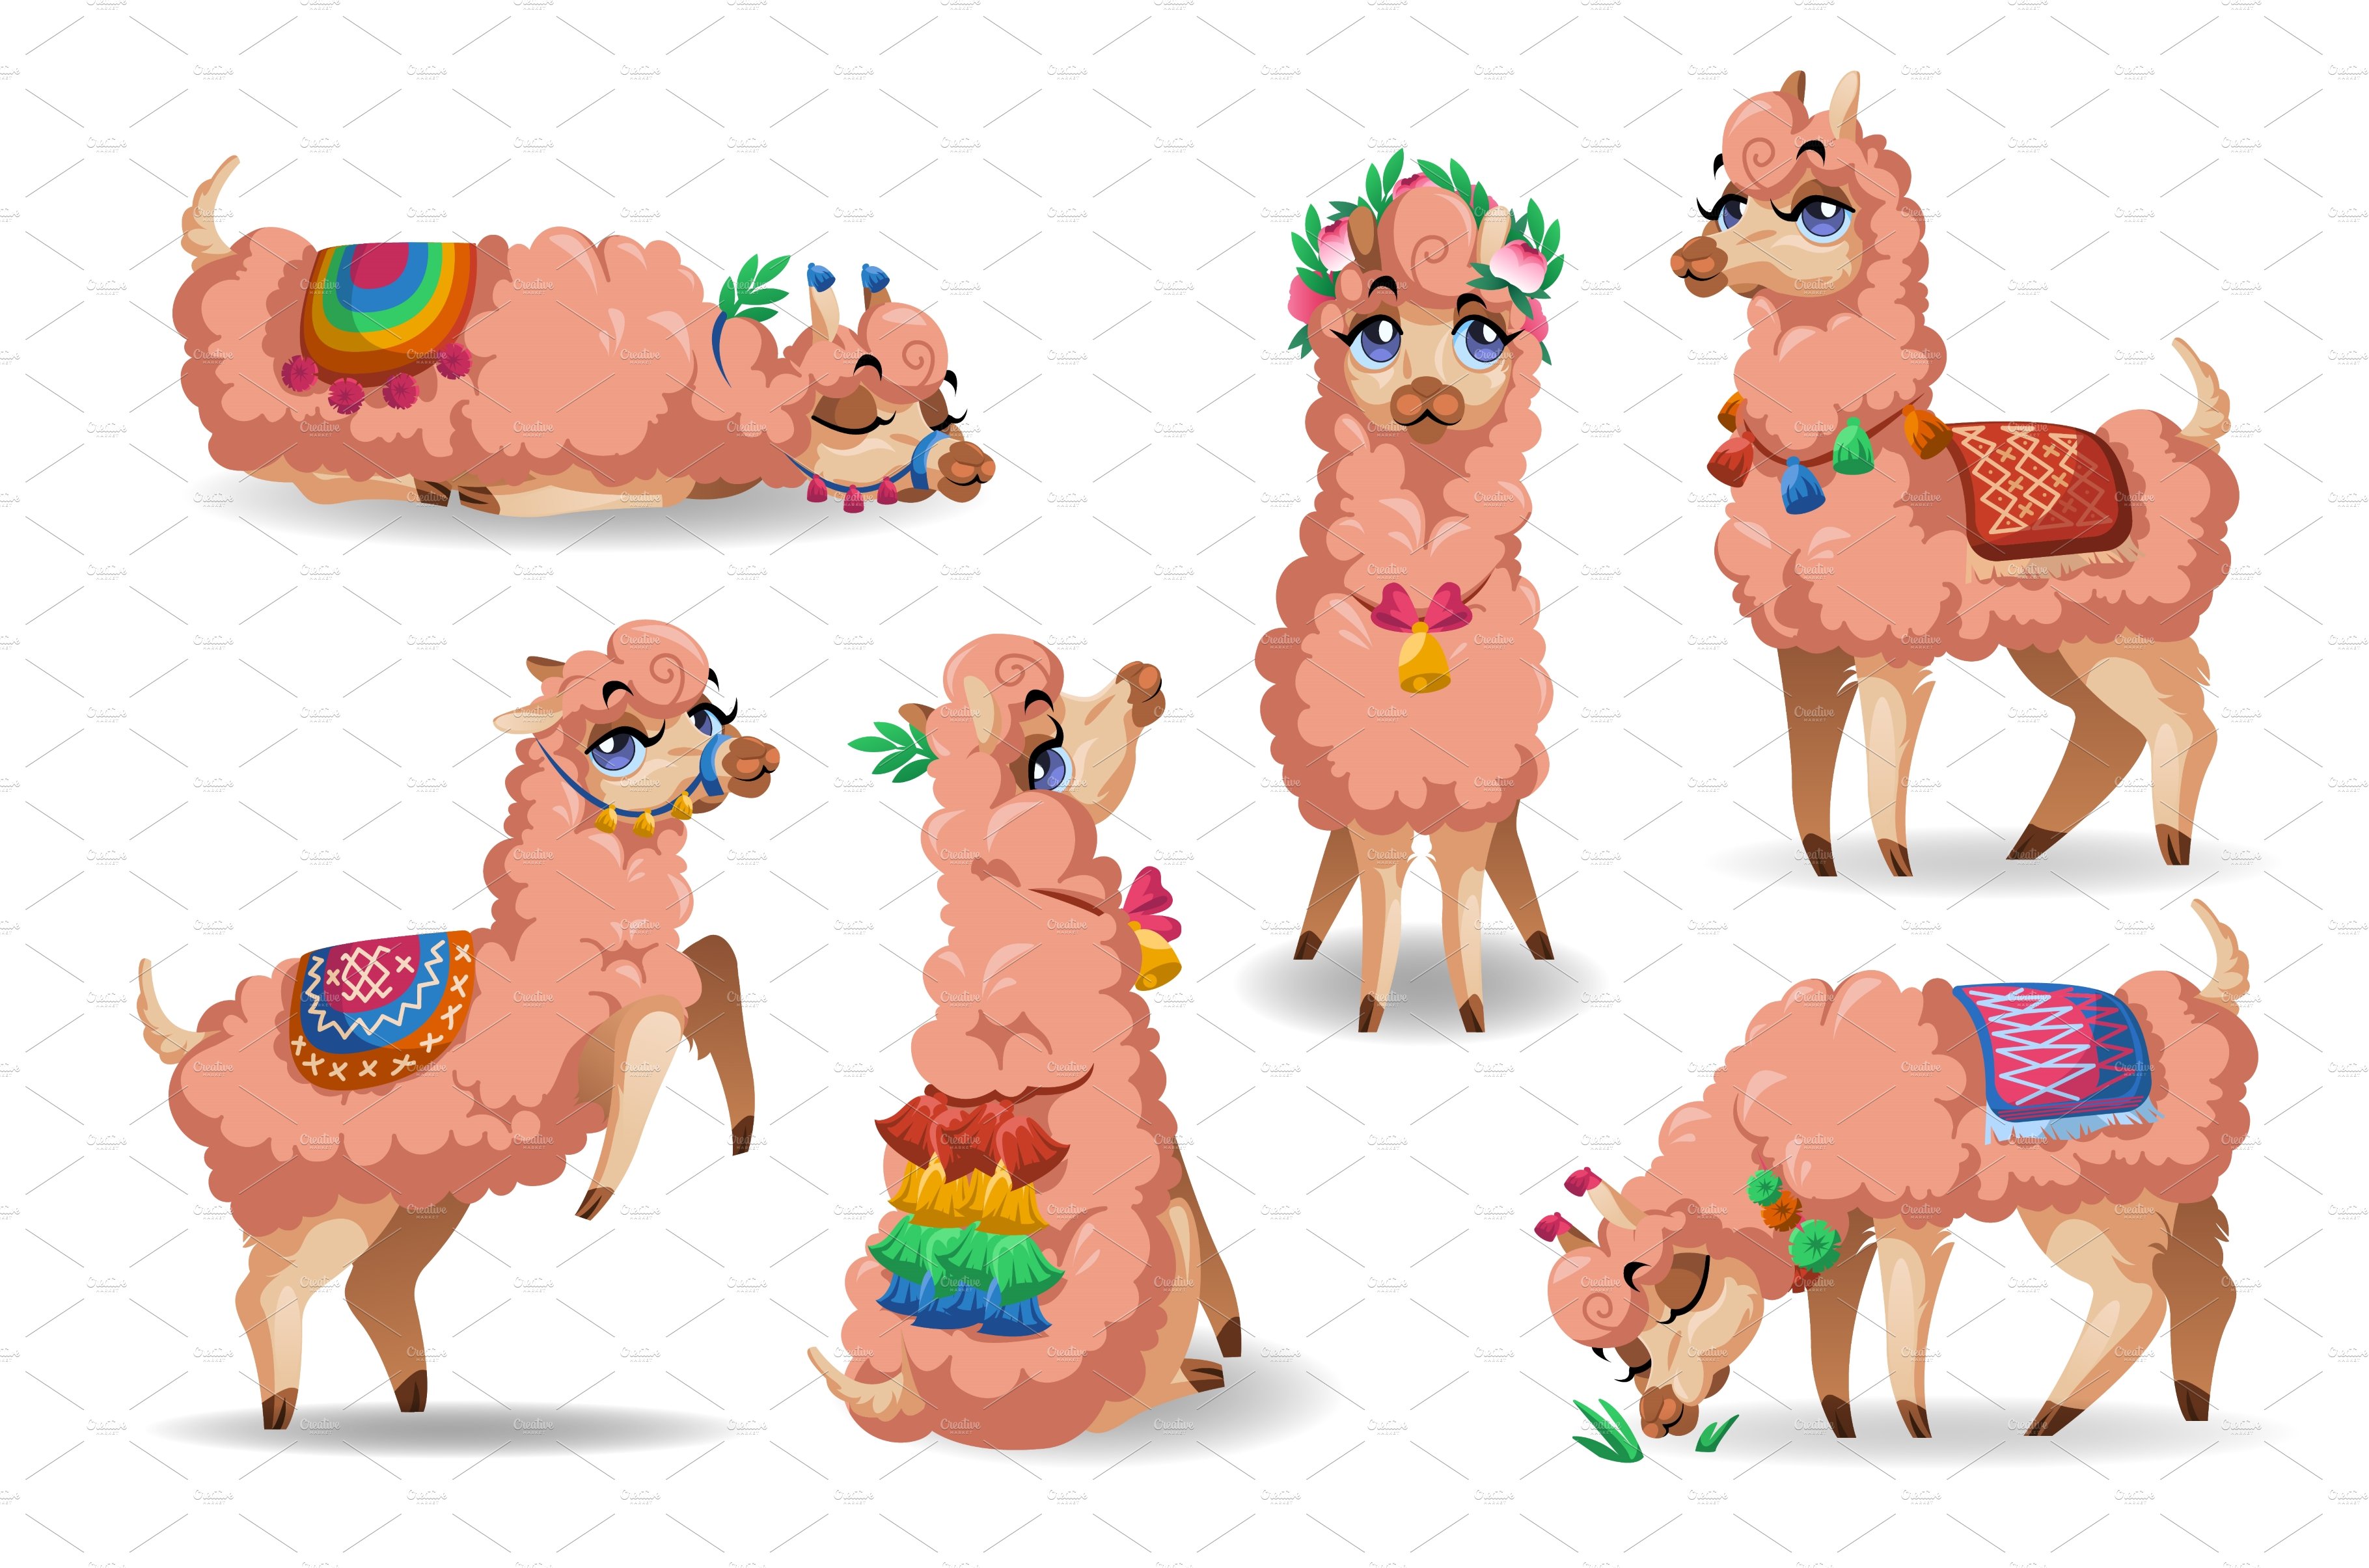 Cute llama character in different cover image.